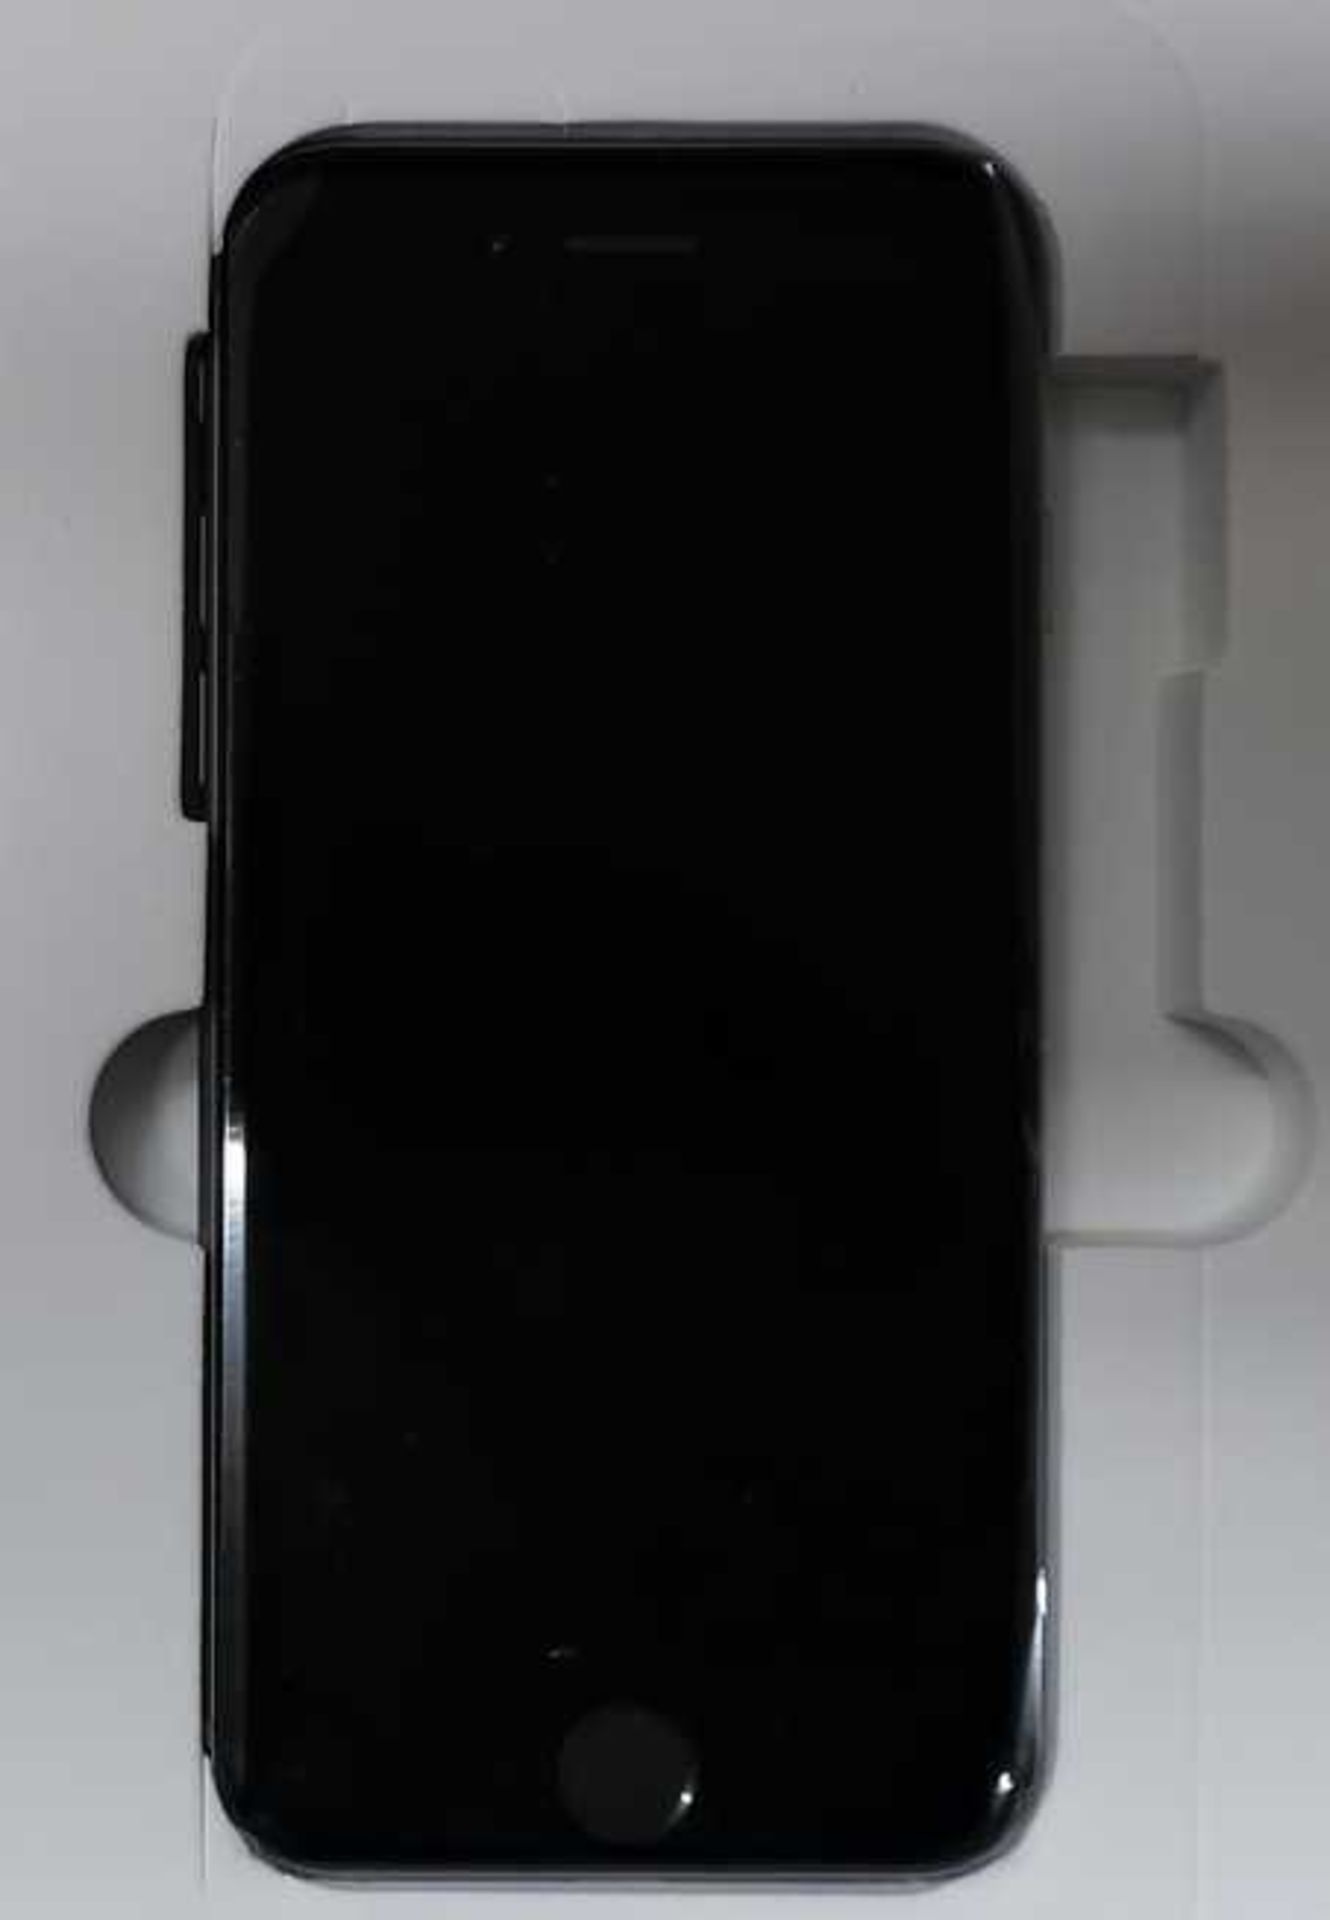 A refurbished Apple iPhone 6 A1586 16GB in Space Gray (IMEI:352032074656031) (No box or